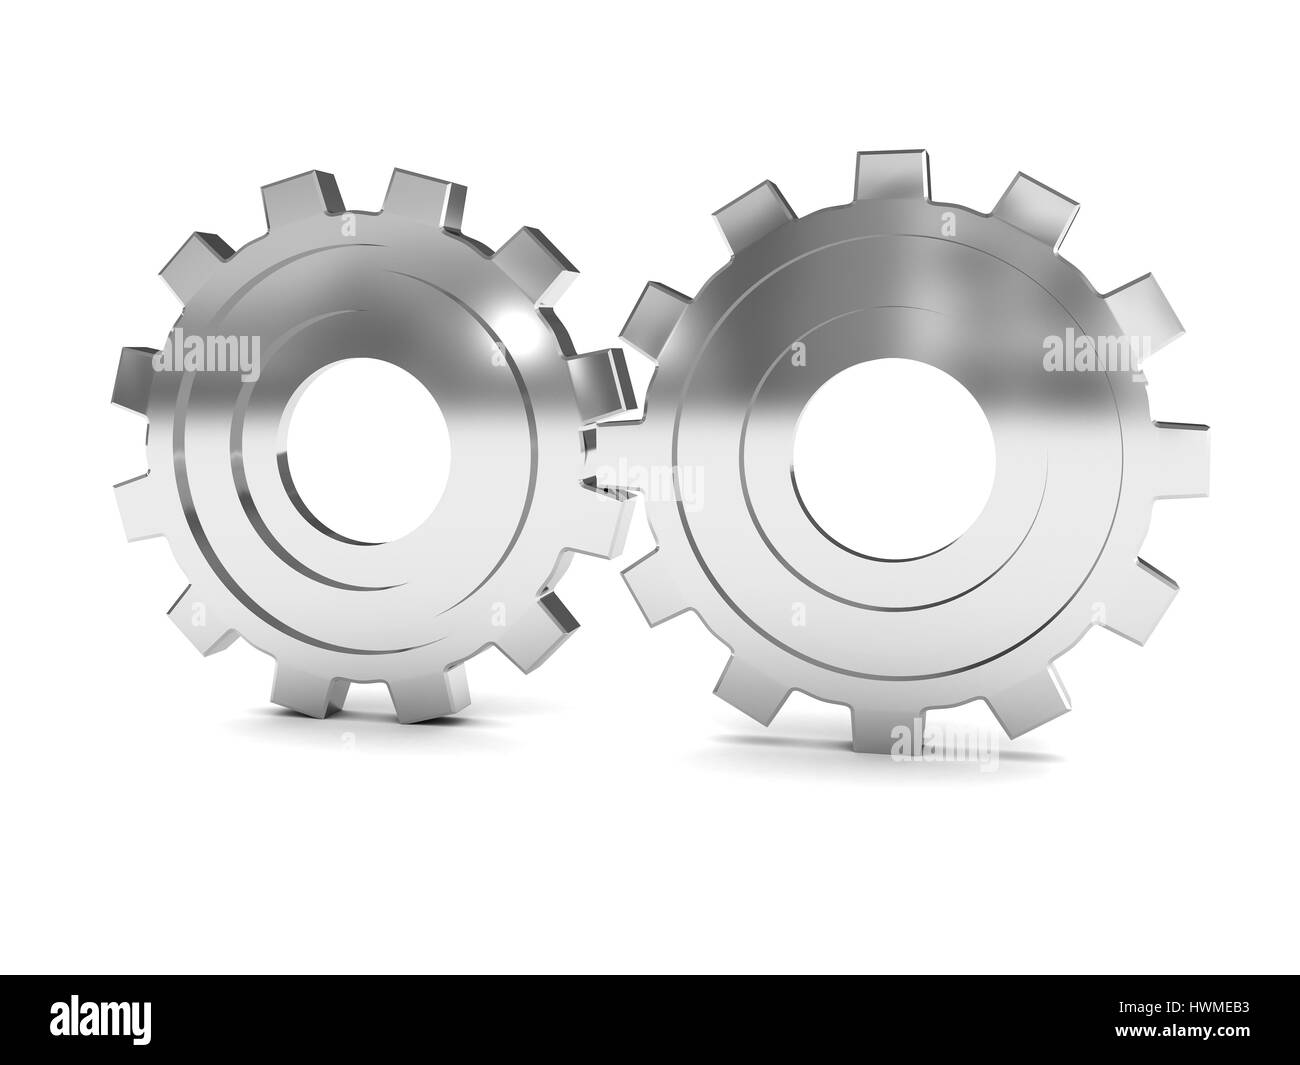 3d illustration of twho gear wheels over white background Stock Photo